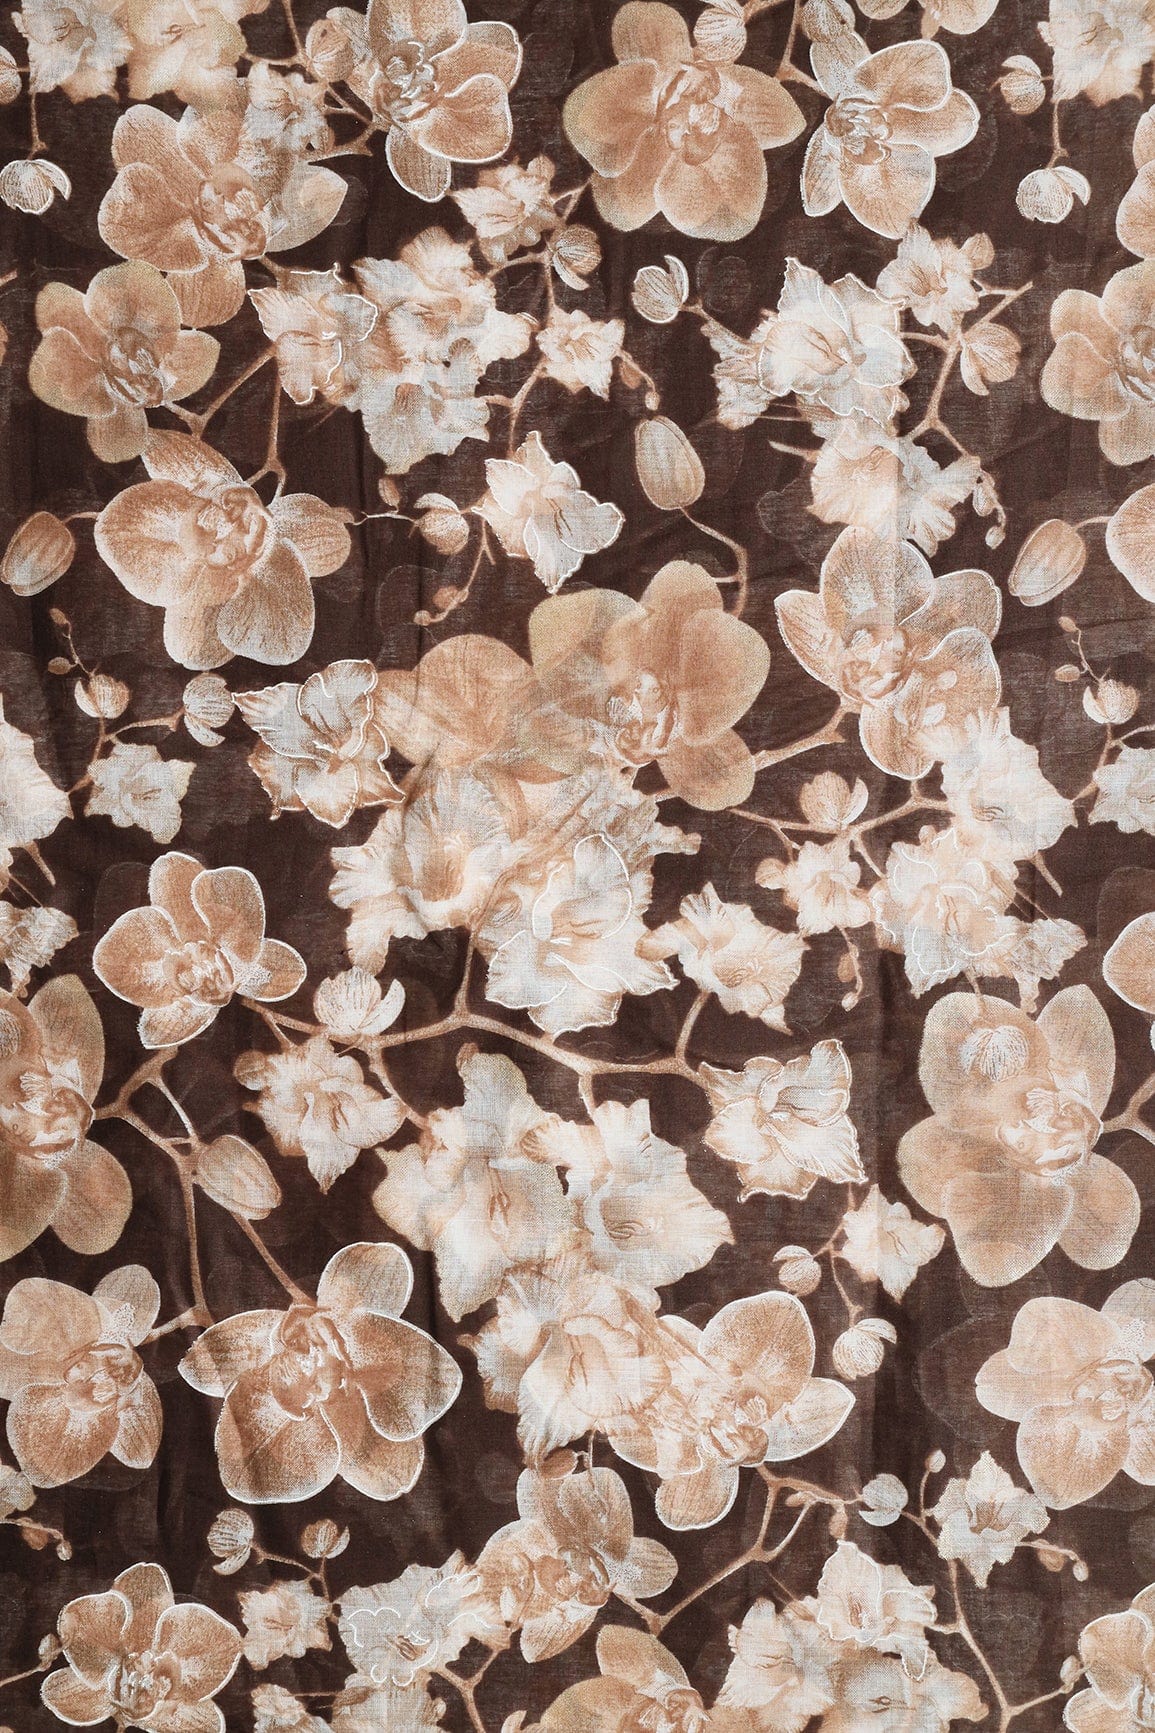 doeraa Prints White And Beige Floral Foil Print On Brown Pure Mul Cotton Fabric